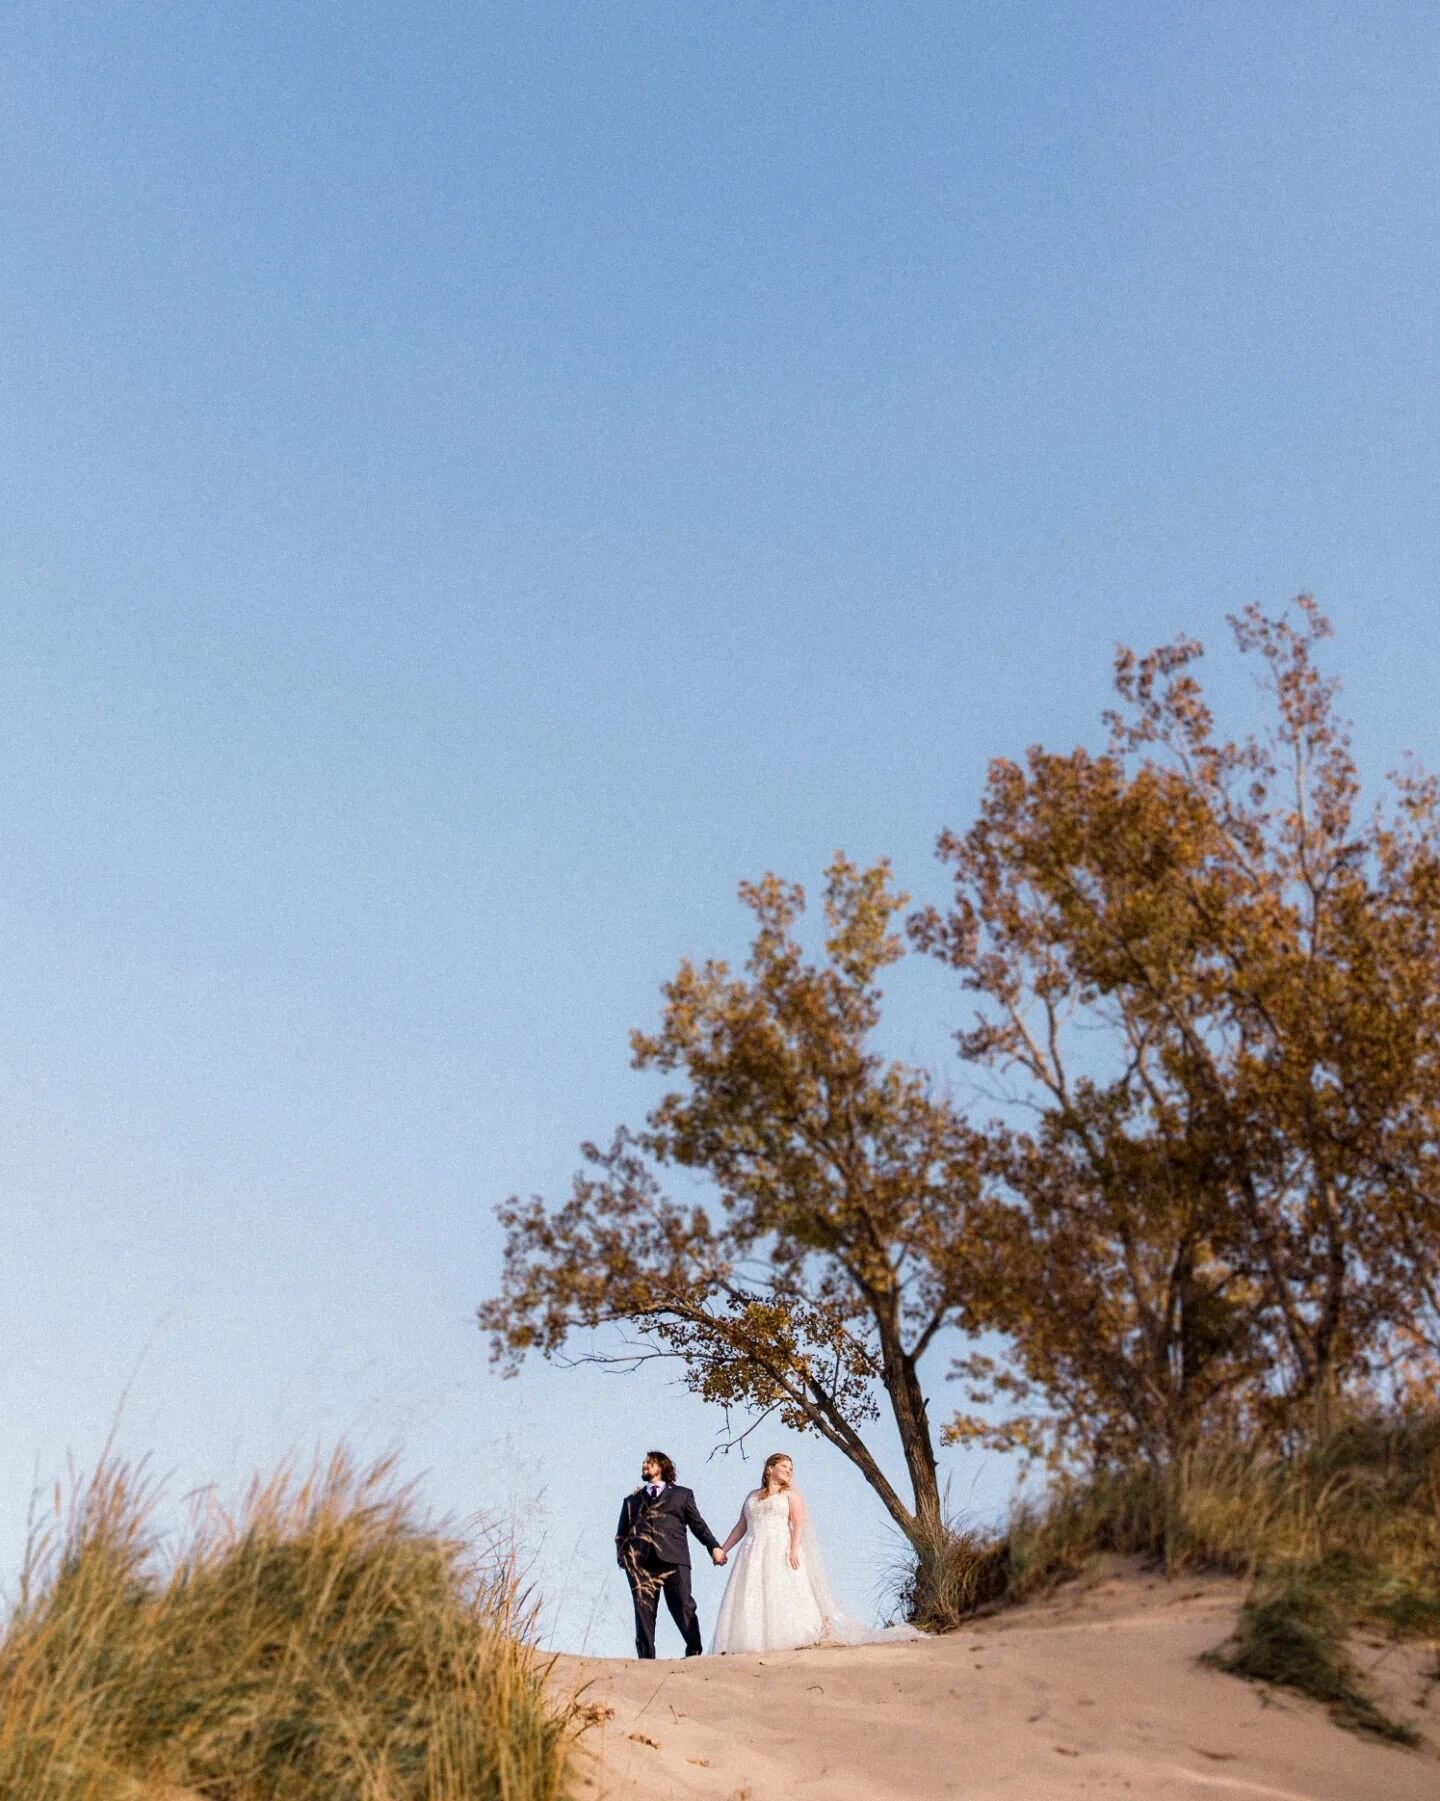 A few frames from Melissa and Jack's elopement at @indianadunesnps 🍂